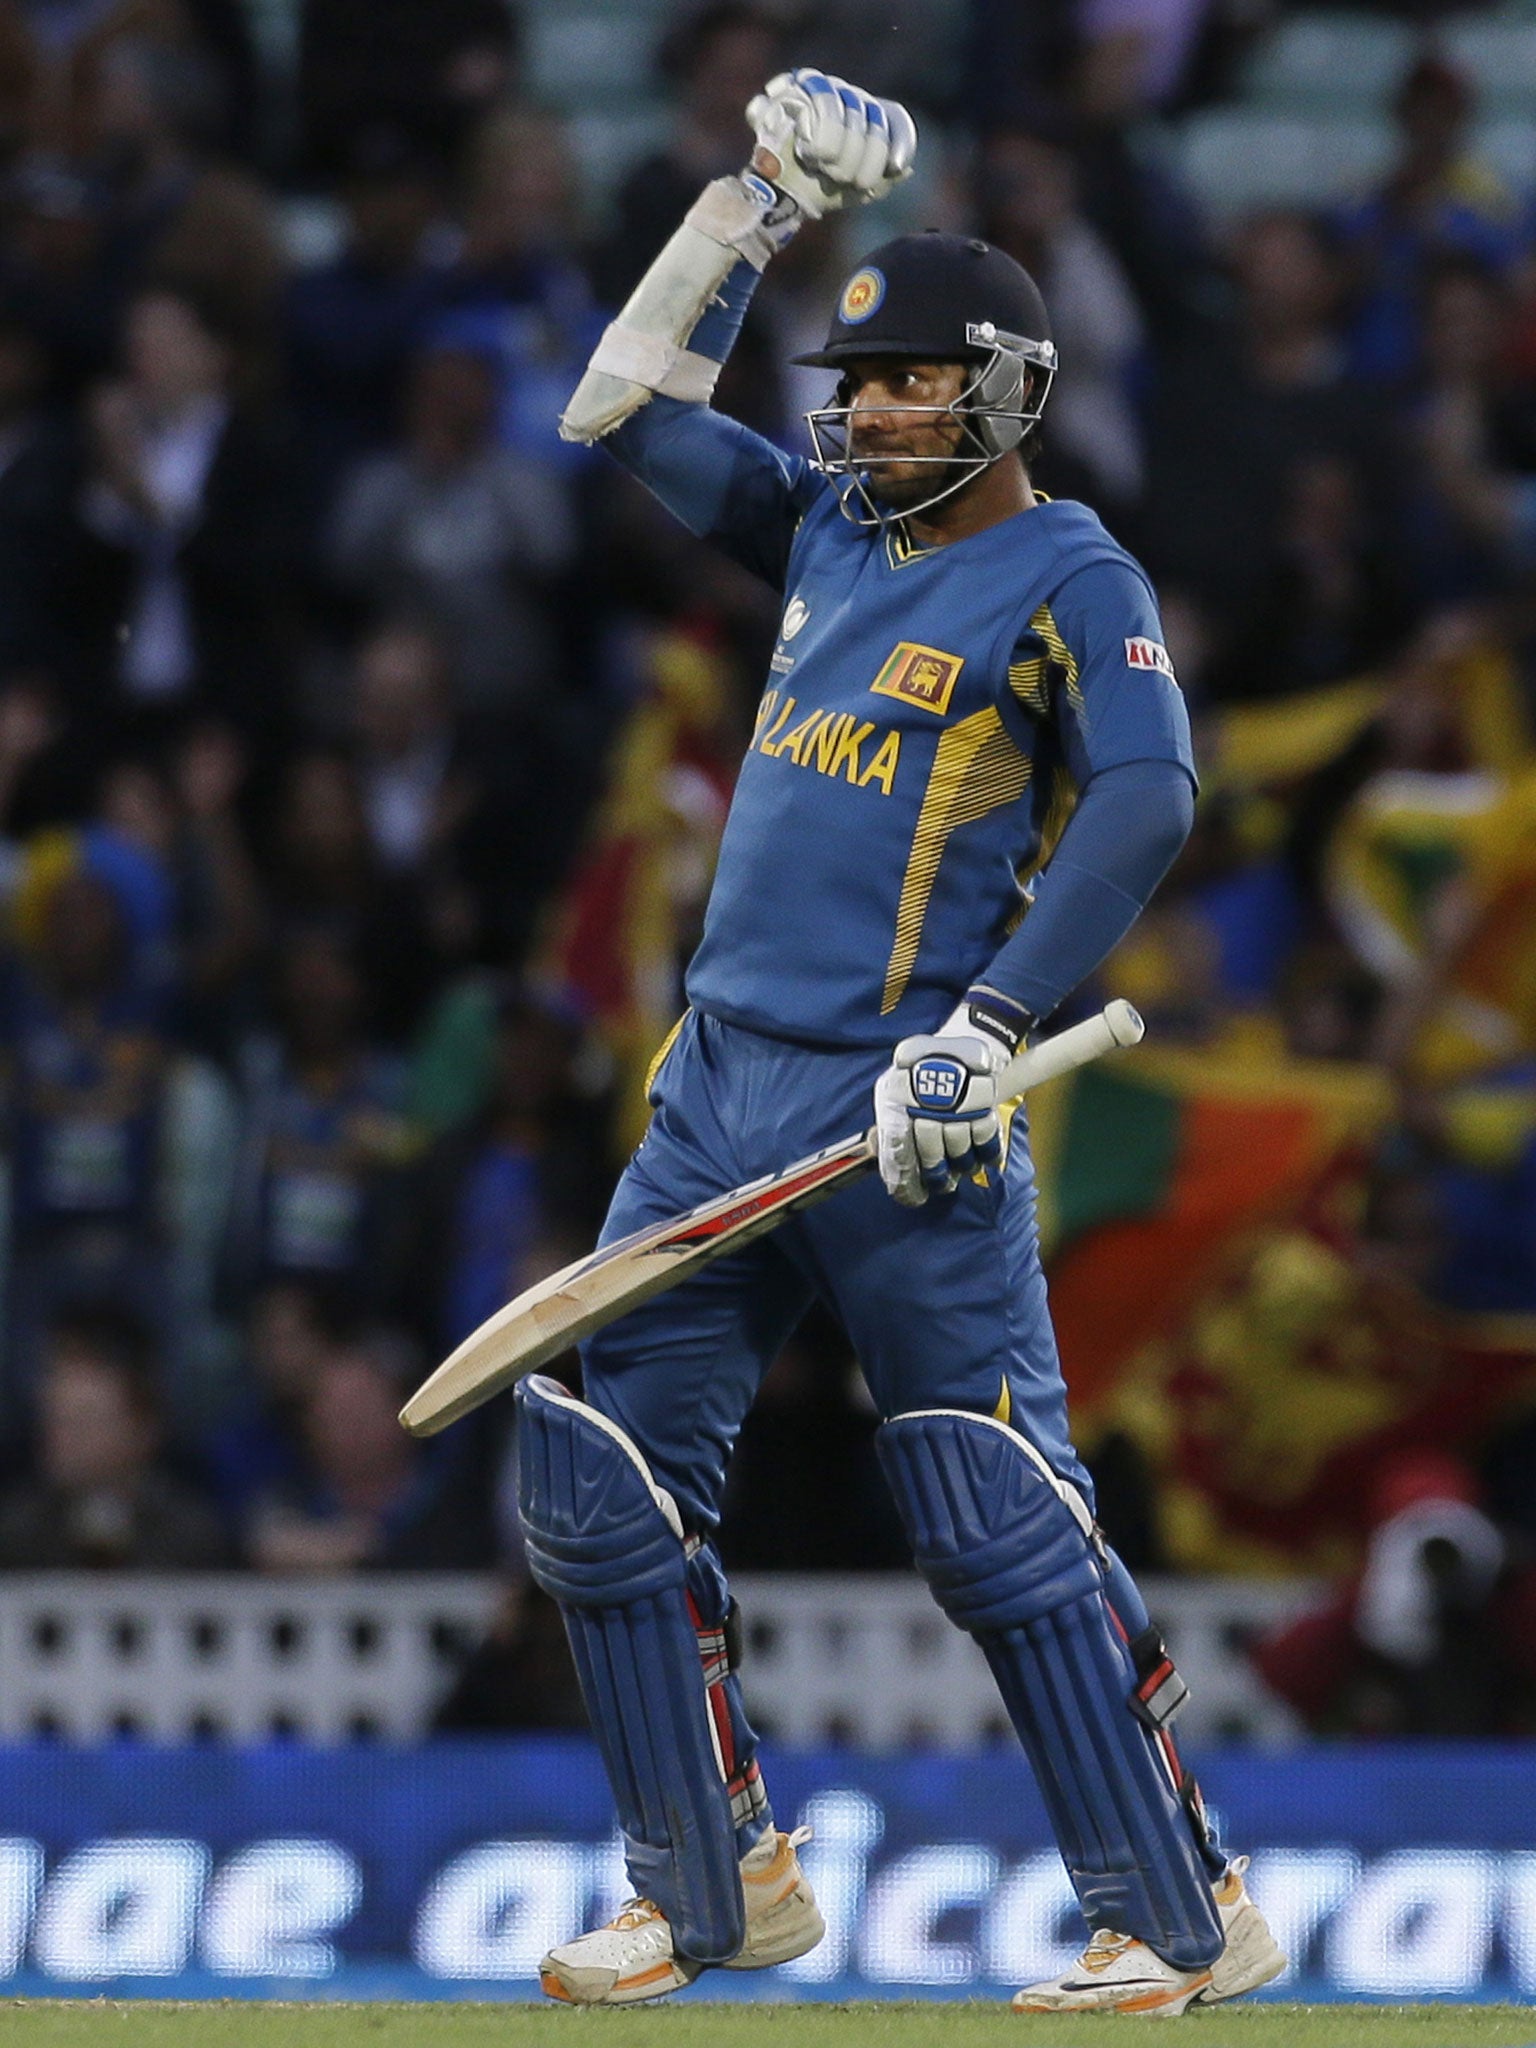 Sri Lanka's Kumar Sangakkara punches the air after he hit the winning runs to defeat England in their ICC Champions Trophy cricket match at the Oval cricket ground in London